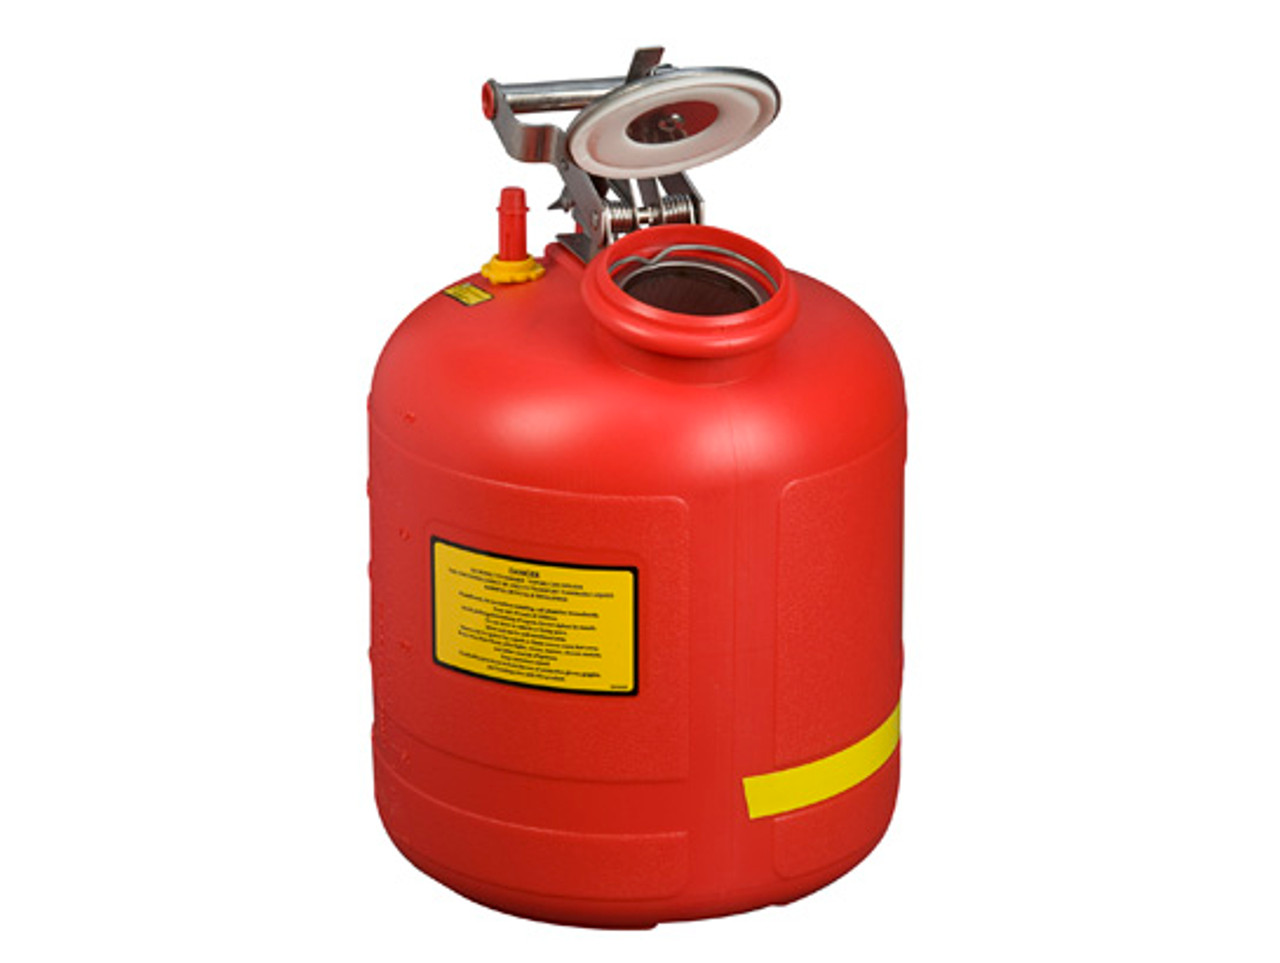 Justrite® Safety Can for Liquid Disposal, Built-in Fill Gauge, 5 gal